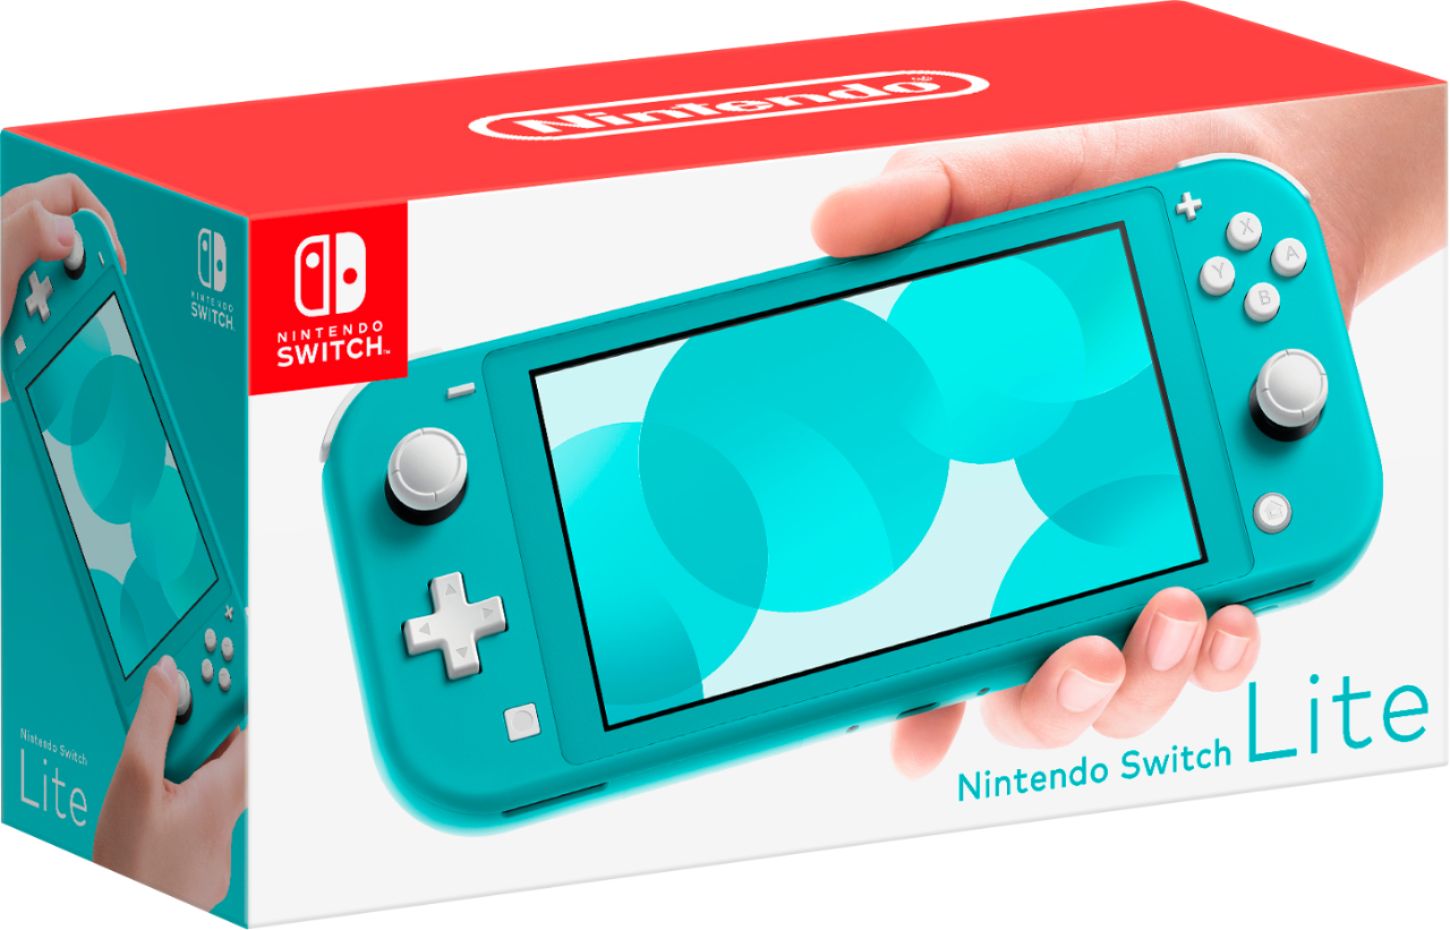 Nintendo Switch Lite Turquoise with Pokemon Shield, Mytrix 128GB MicroSD Card and Accessories NS Game Disc Bundle Best Holiday Gift